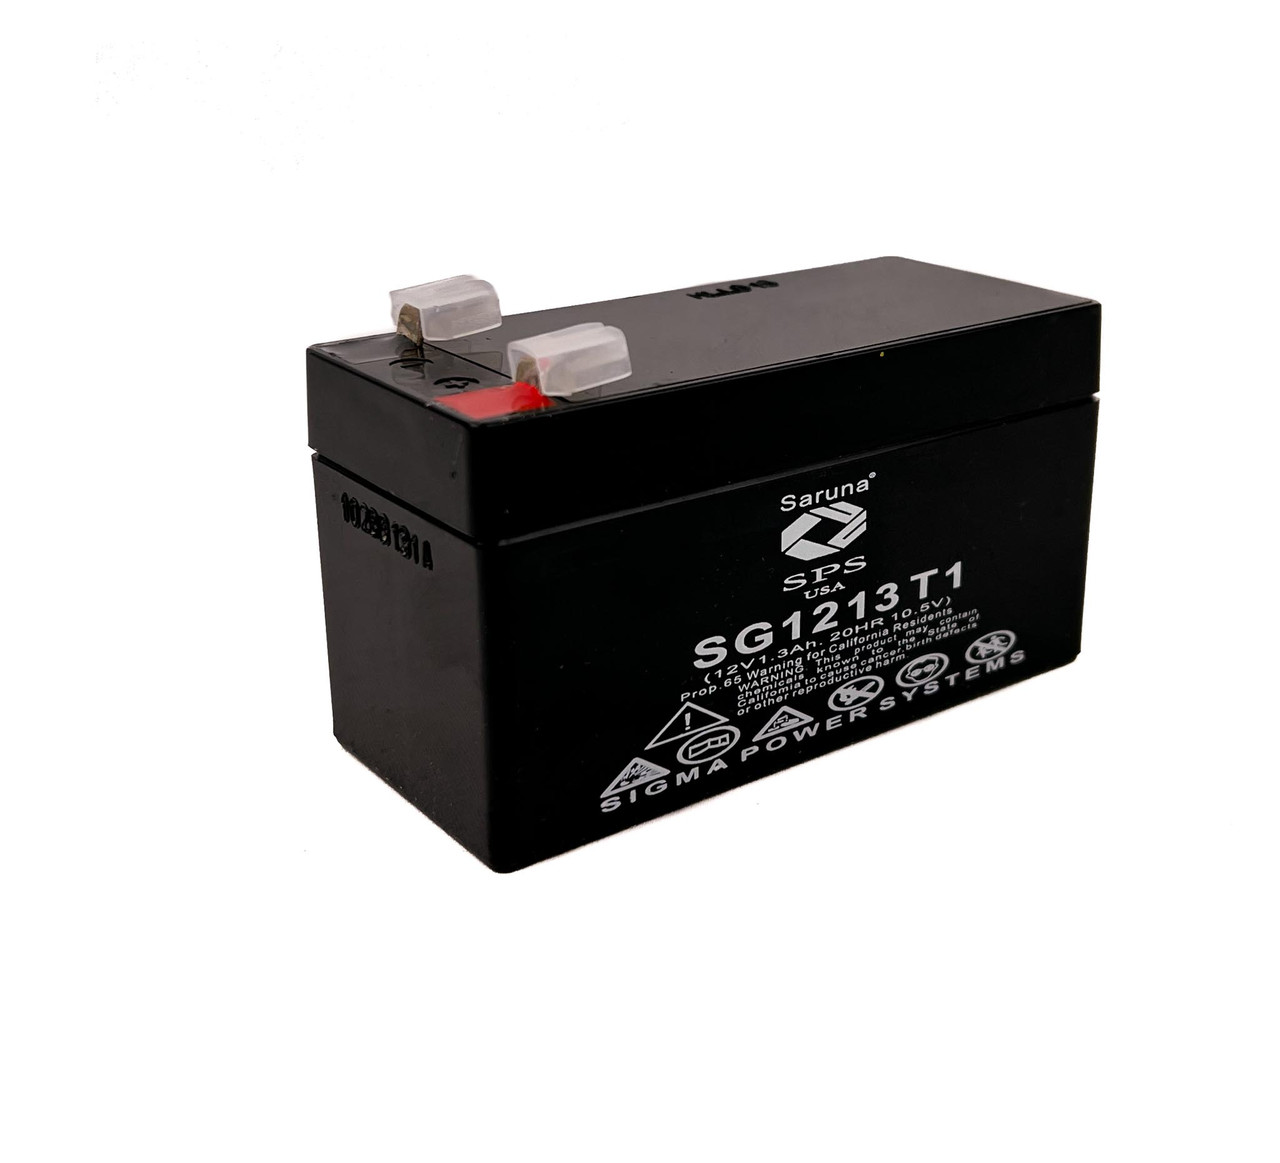 Raion Power 12V 1.3Ah Non-Spillable Replacement Rechargebale Battery for 2012 Mercedes-Benz ML 350 4Matic 3.0L V6 Diesel